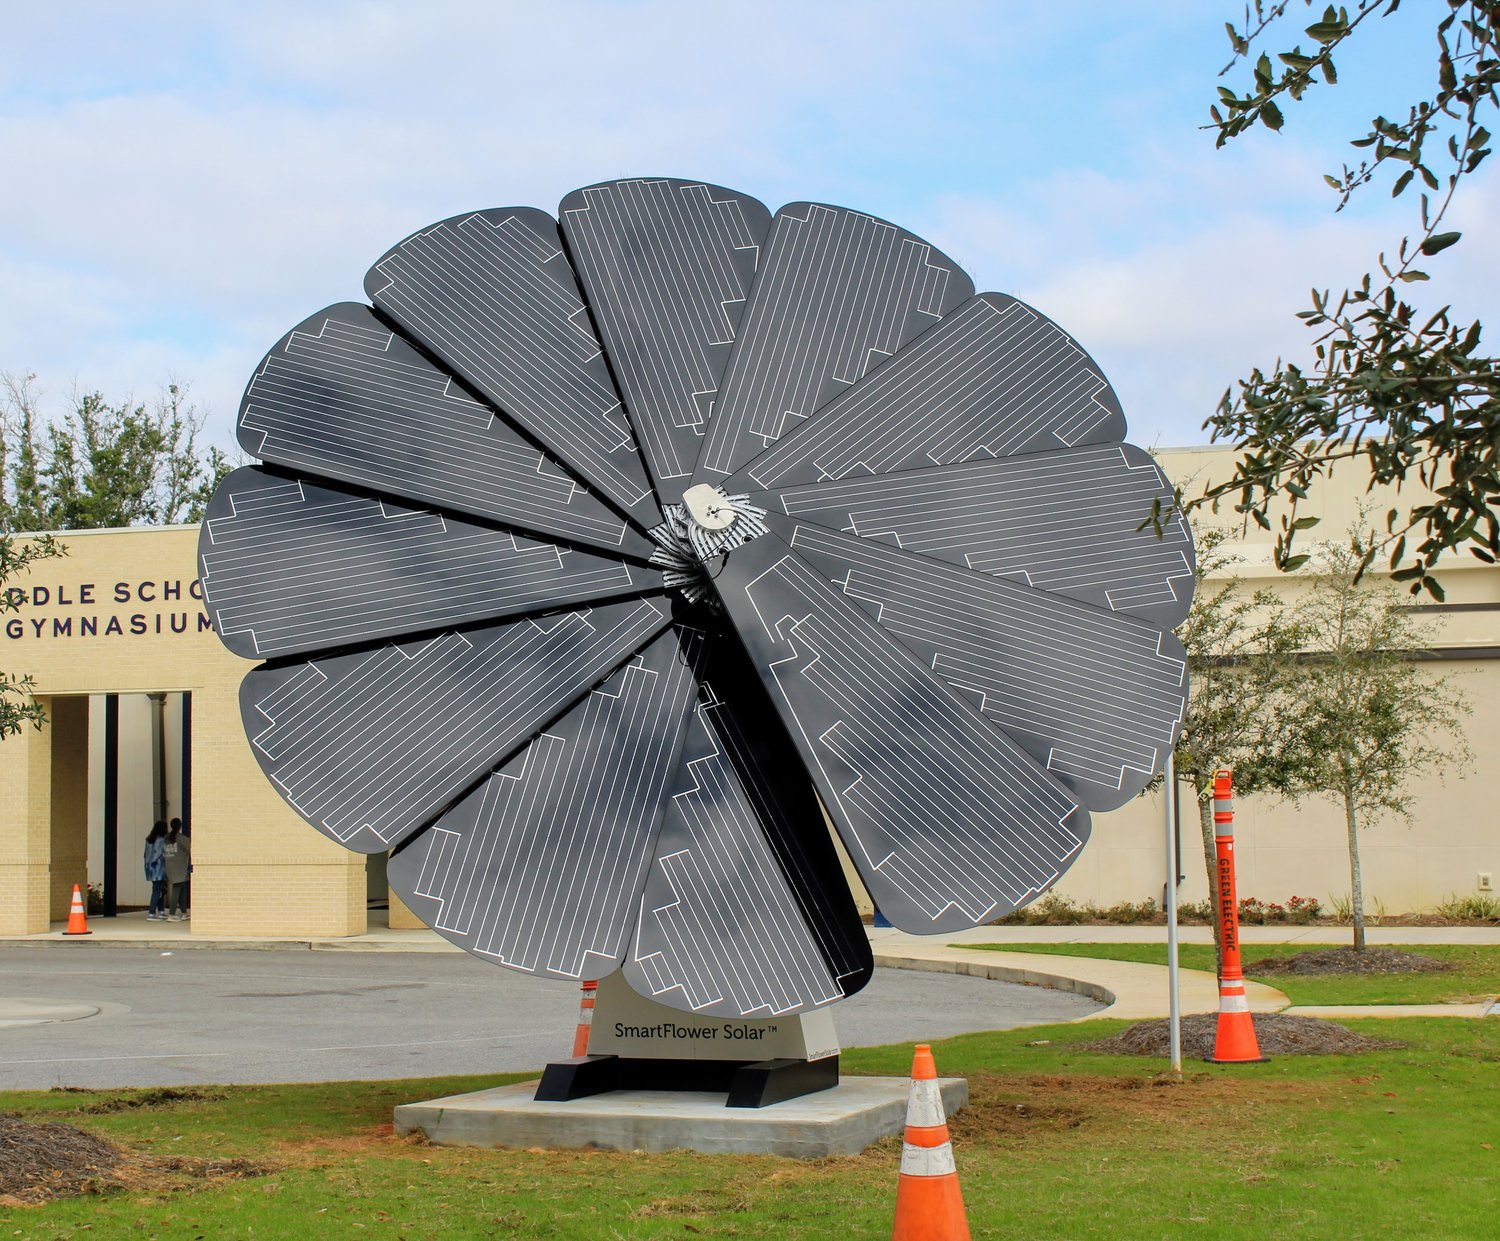 Two SmartFlower solar arrays have been installed on the Gulf Shores City Schools campus. The self-contained solar electric system is designed to mimic the unfurling of a flower when the sun rises.  The solar panels follow the sun throughout the day, making up to 40% more energy than stationary solar panels.